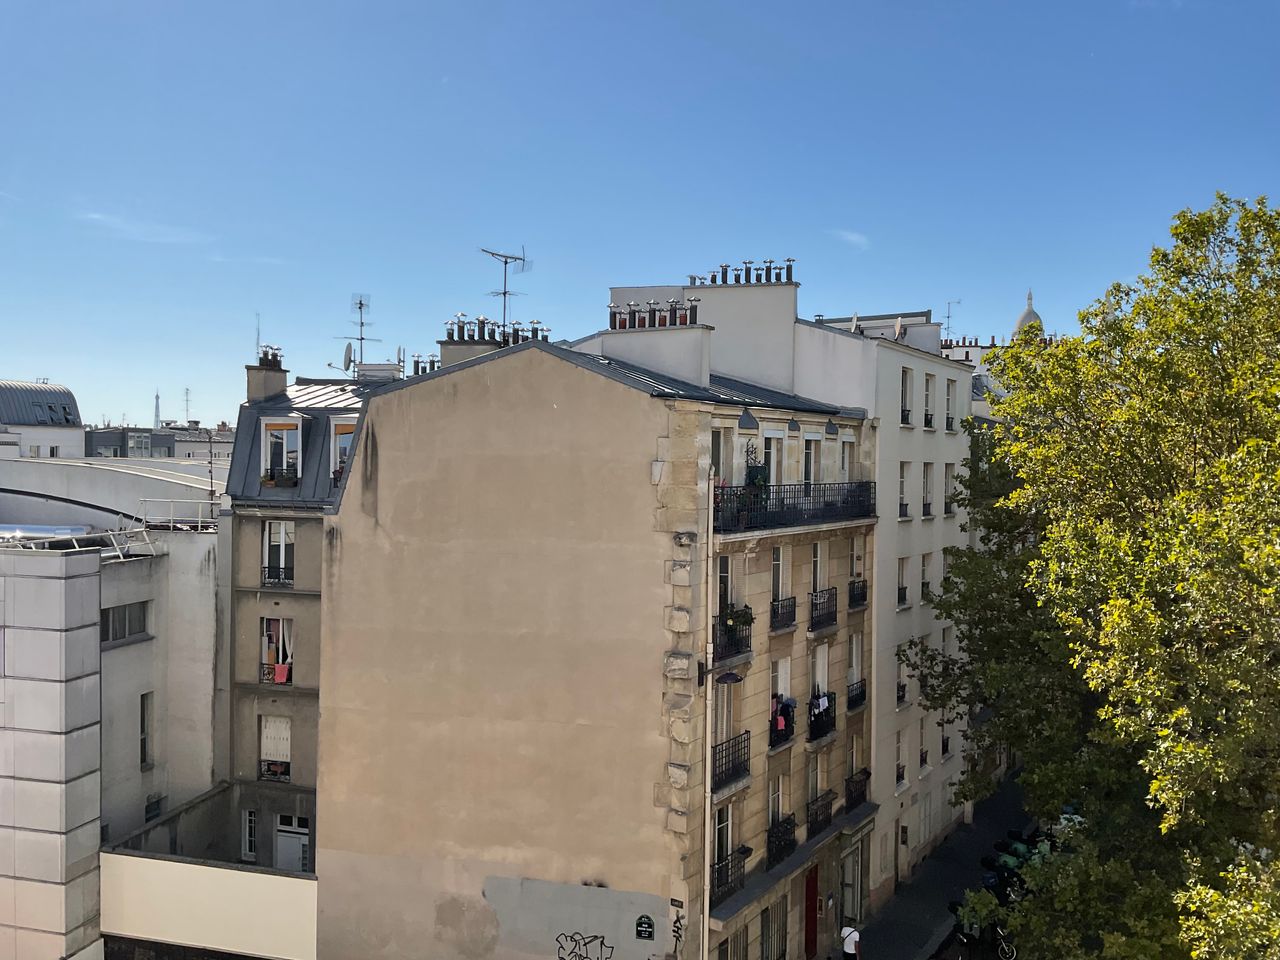 Great one bedroom flat with great view of Paris roofs